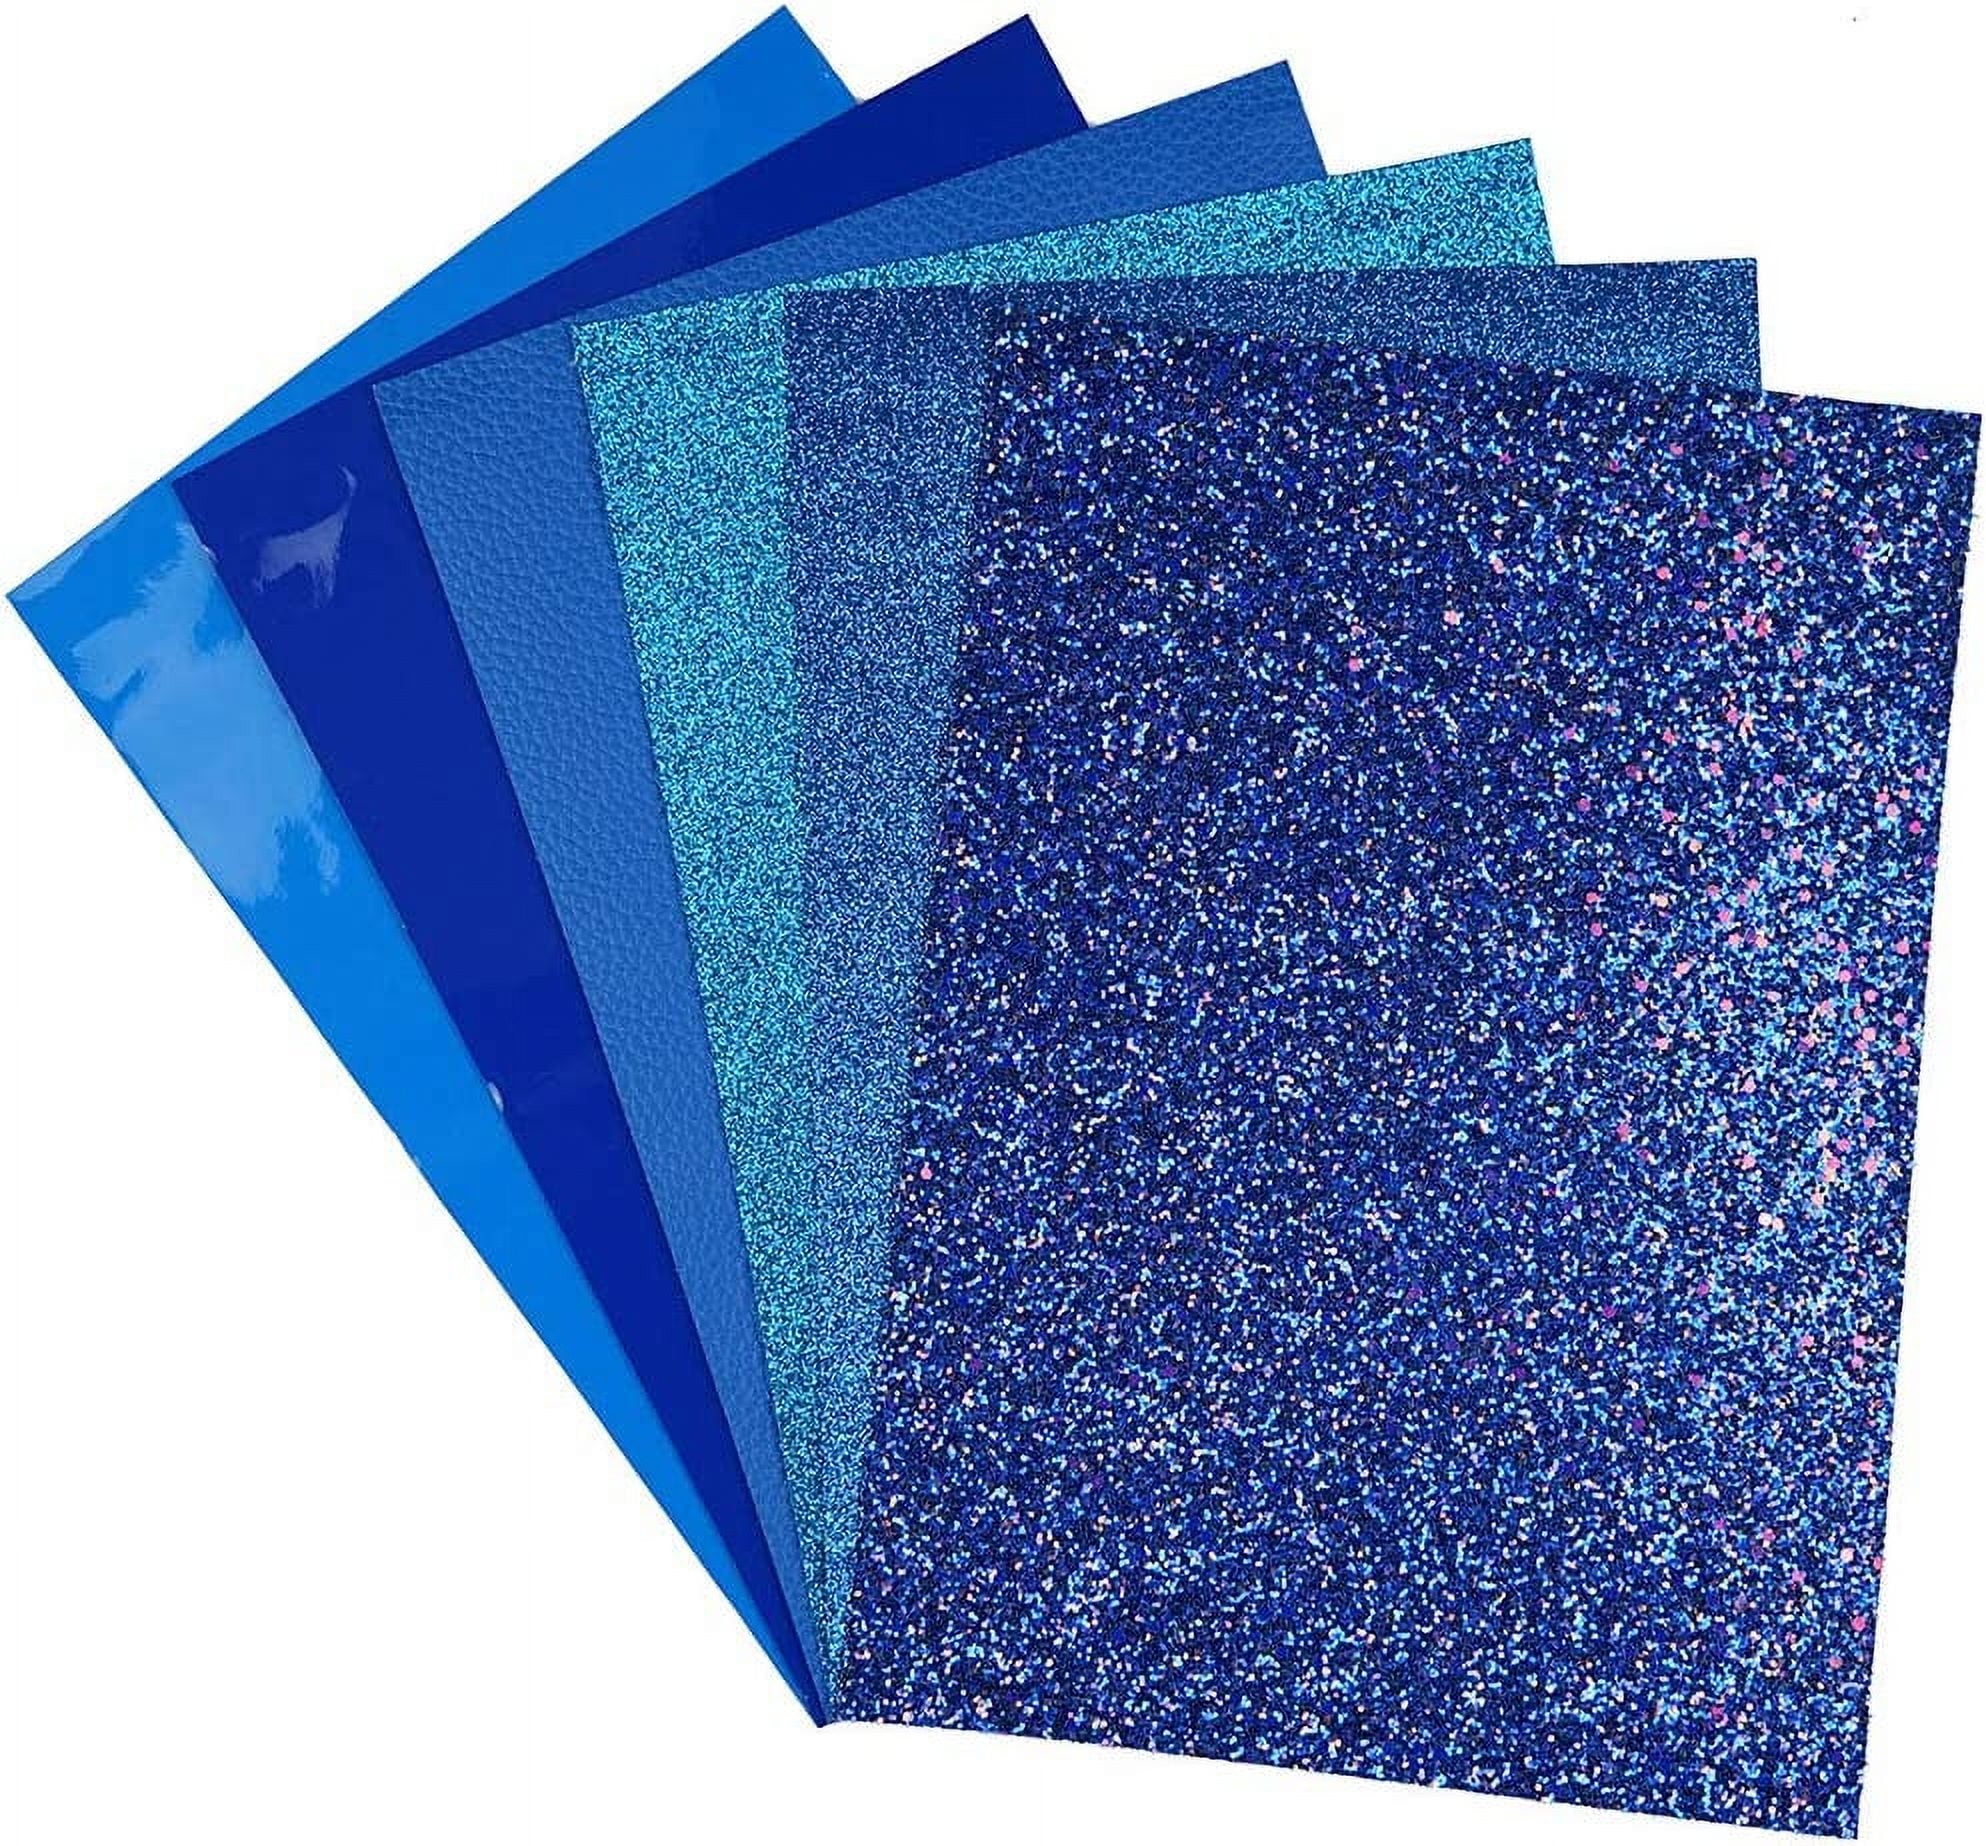 Shalun 50pcs Printed Glitter Faux Leather Sheets 8x12inch Assorted